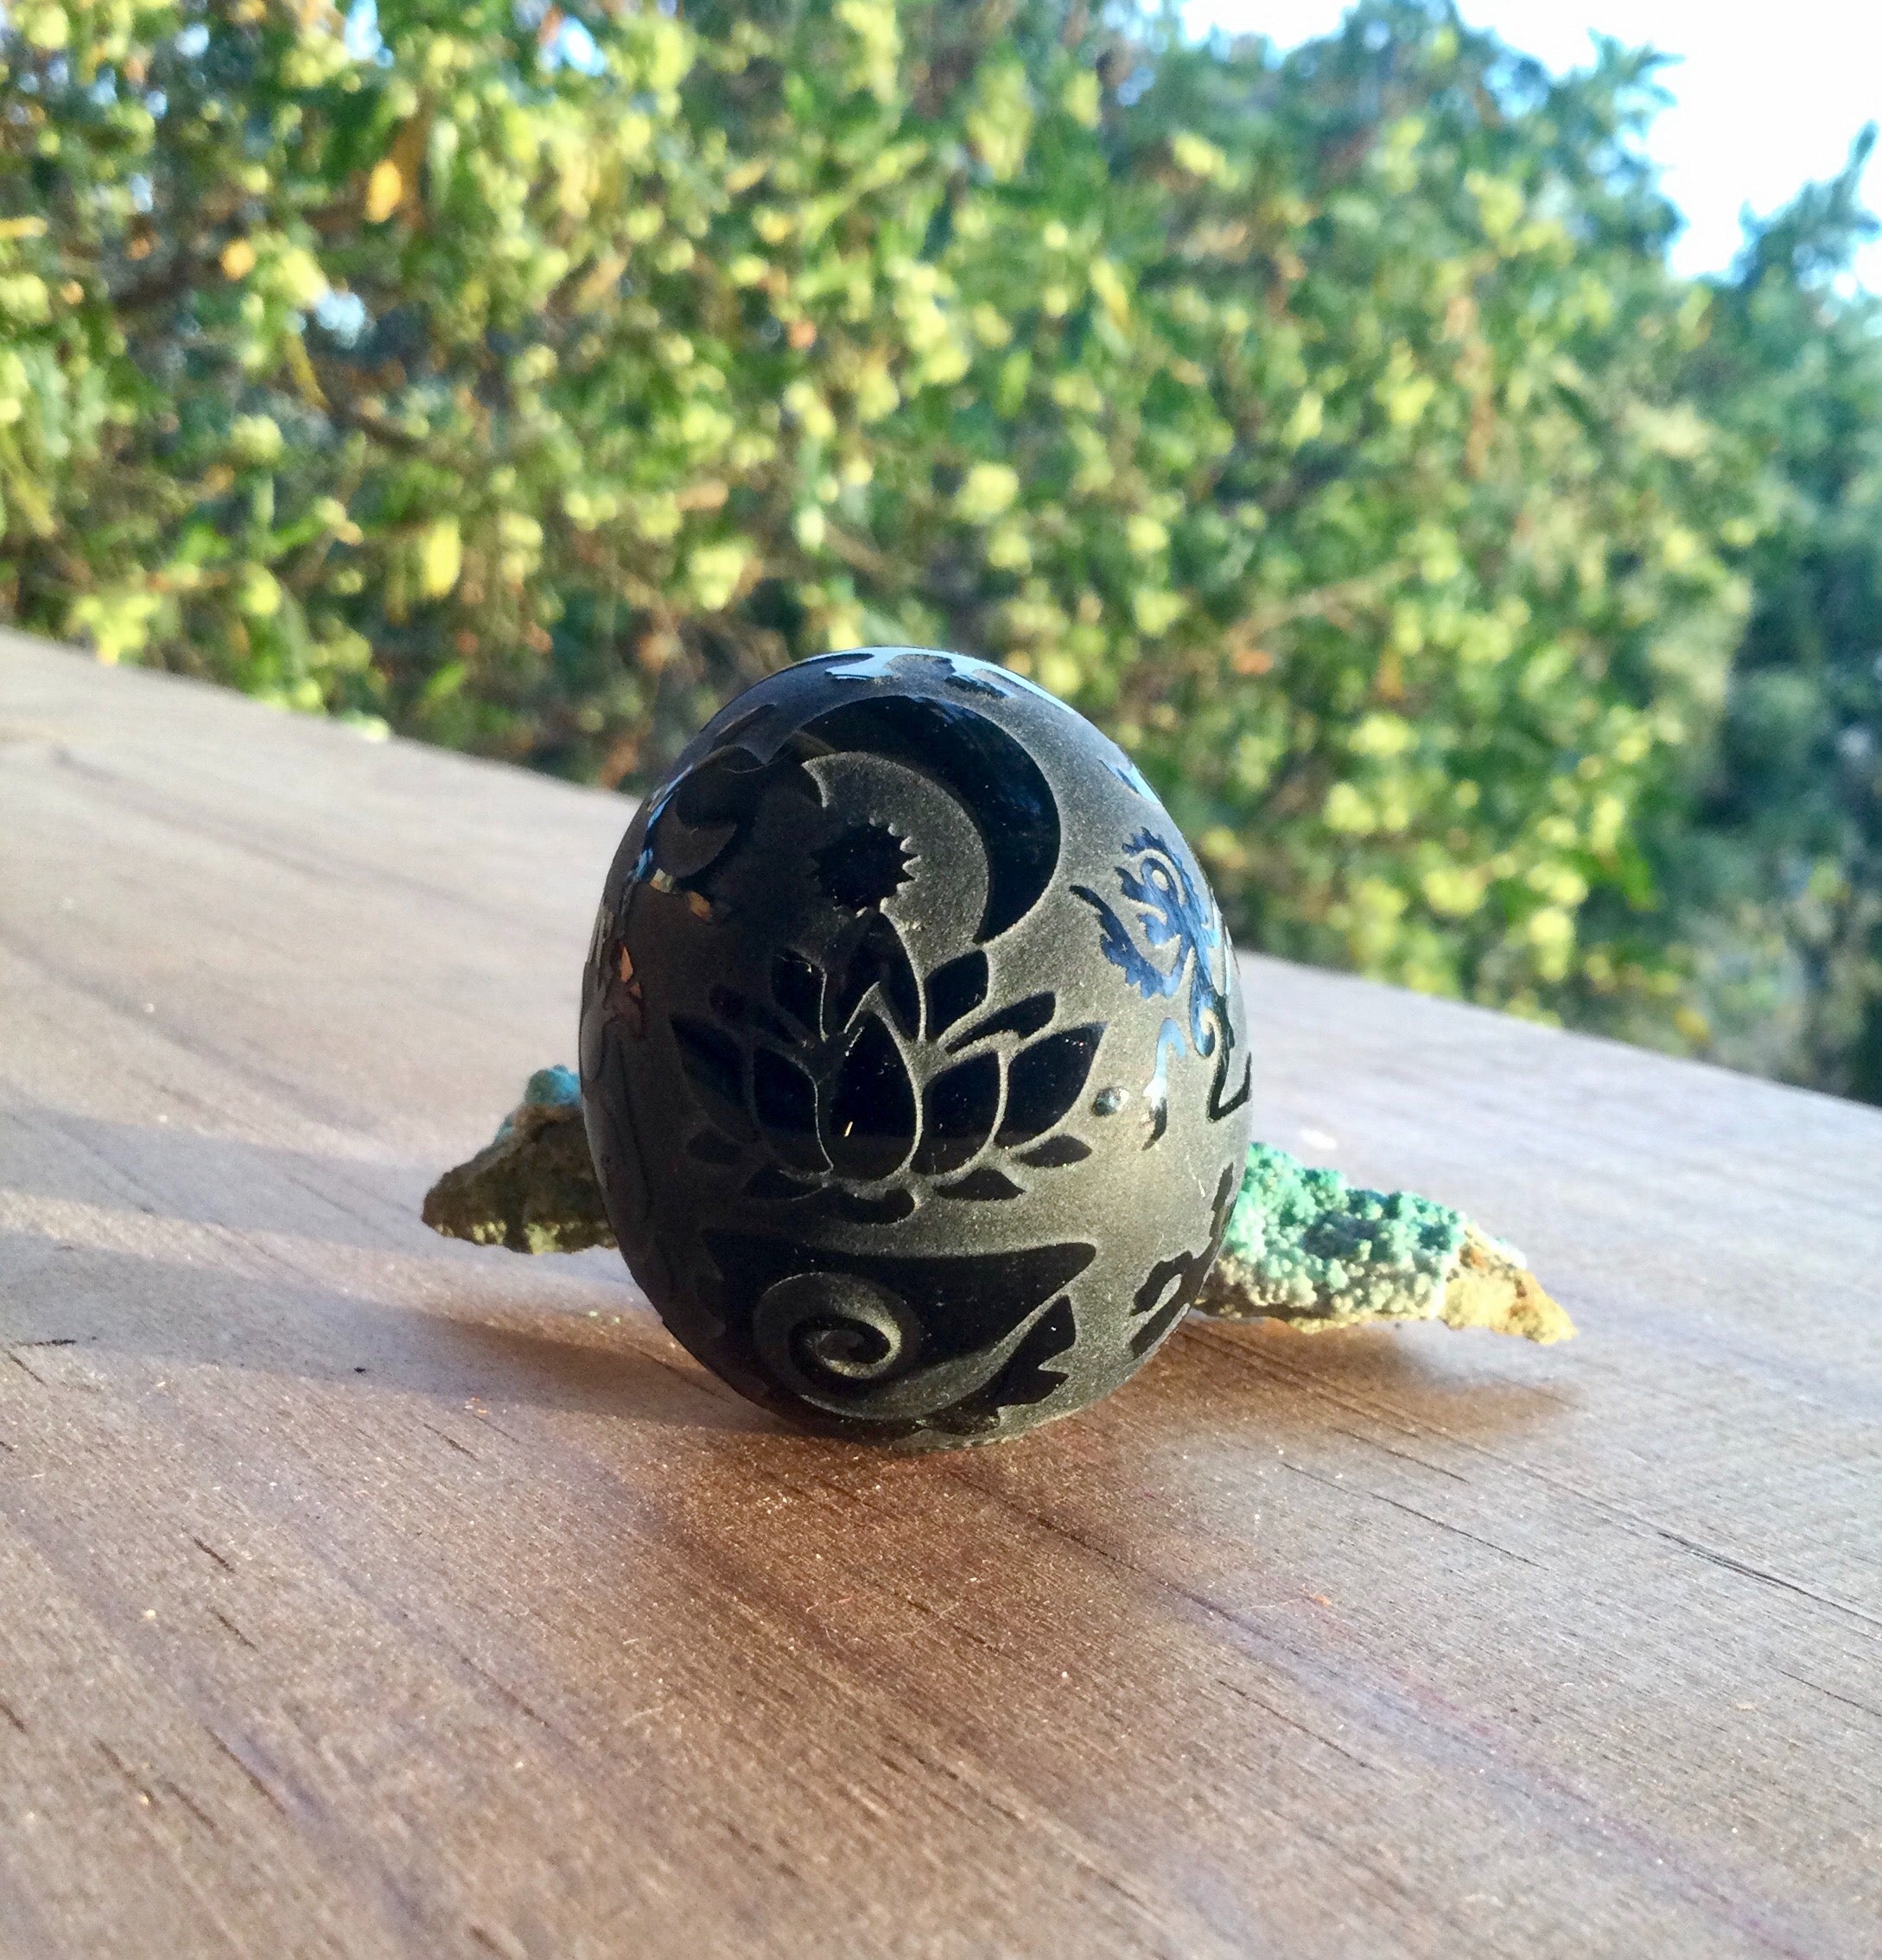 Obsidian egg carving - symbolic decoration, Handcrafted obsidian egg with engraved symbols, Obsidian egg decoration with protective symbolism, Revelatory obsidian egg ornament, Symbolic obsidian egg carving for protection, Hand-carved obsidian egg with me